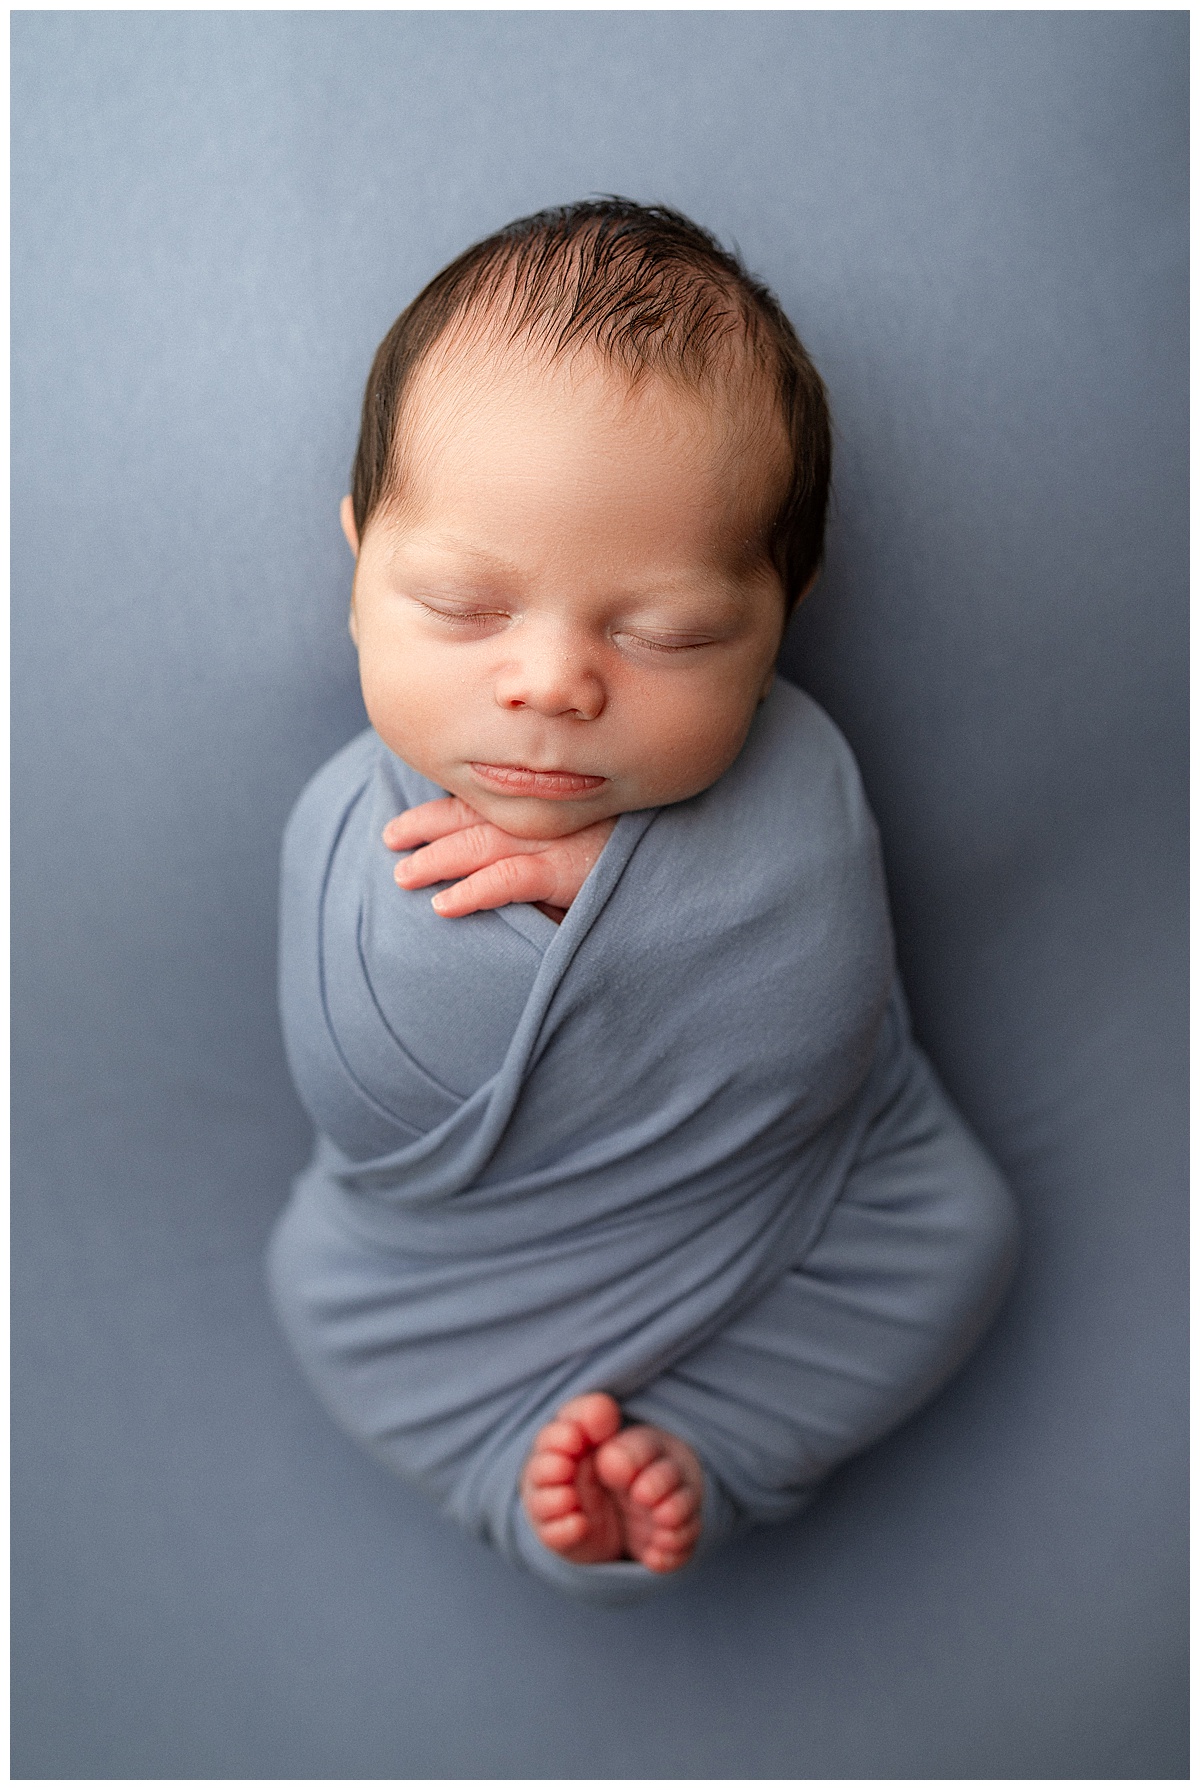 Baby lays wrapped tightly in blue wrap for Norma Fayak Photography